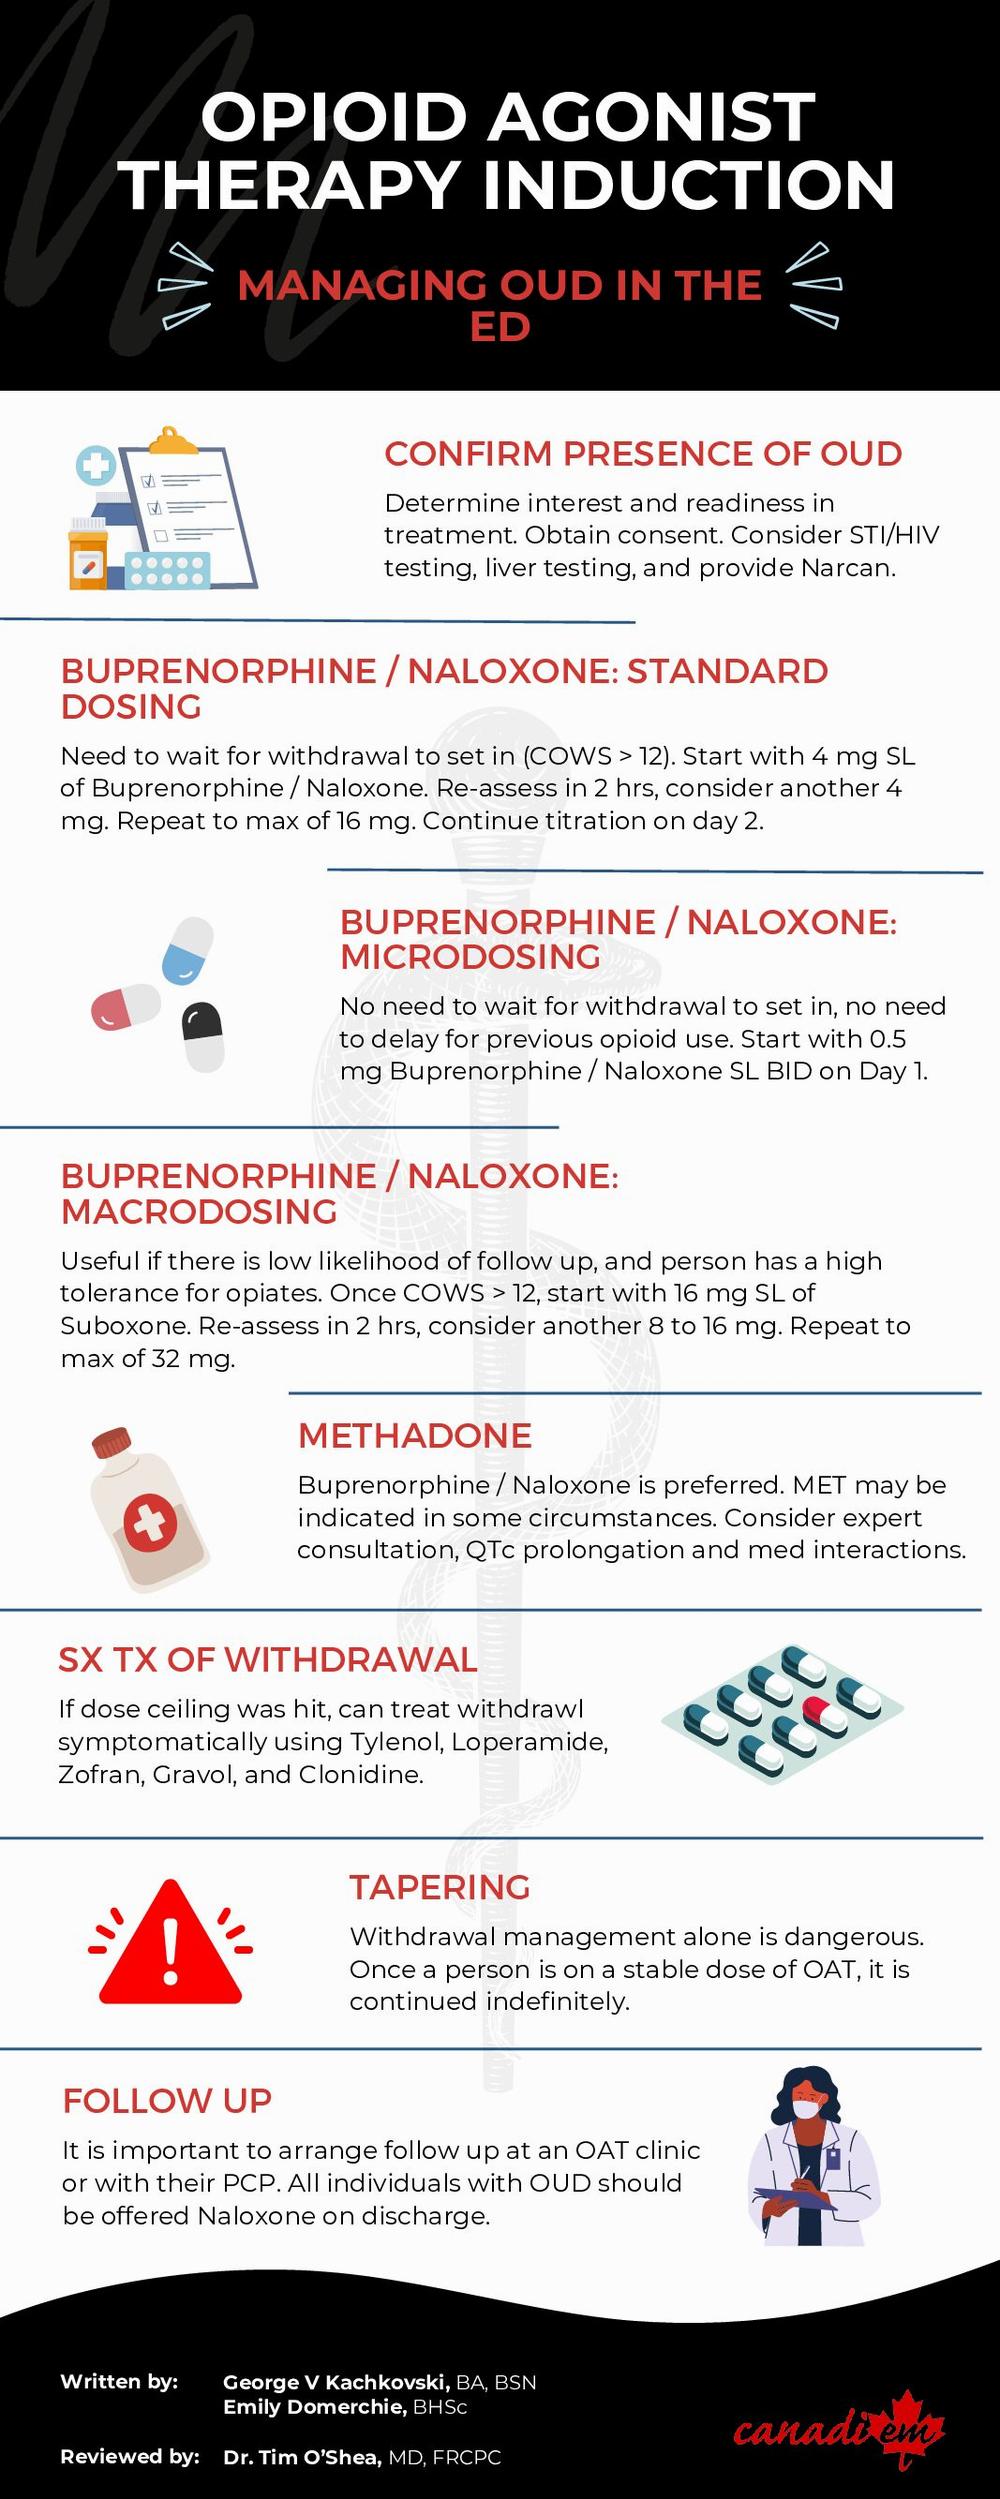 A table summarizing the different ways to induce opioid agonist therapy for the management of opioid use disorder in the emergency department.